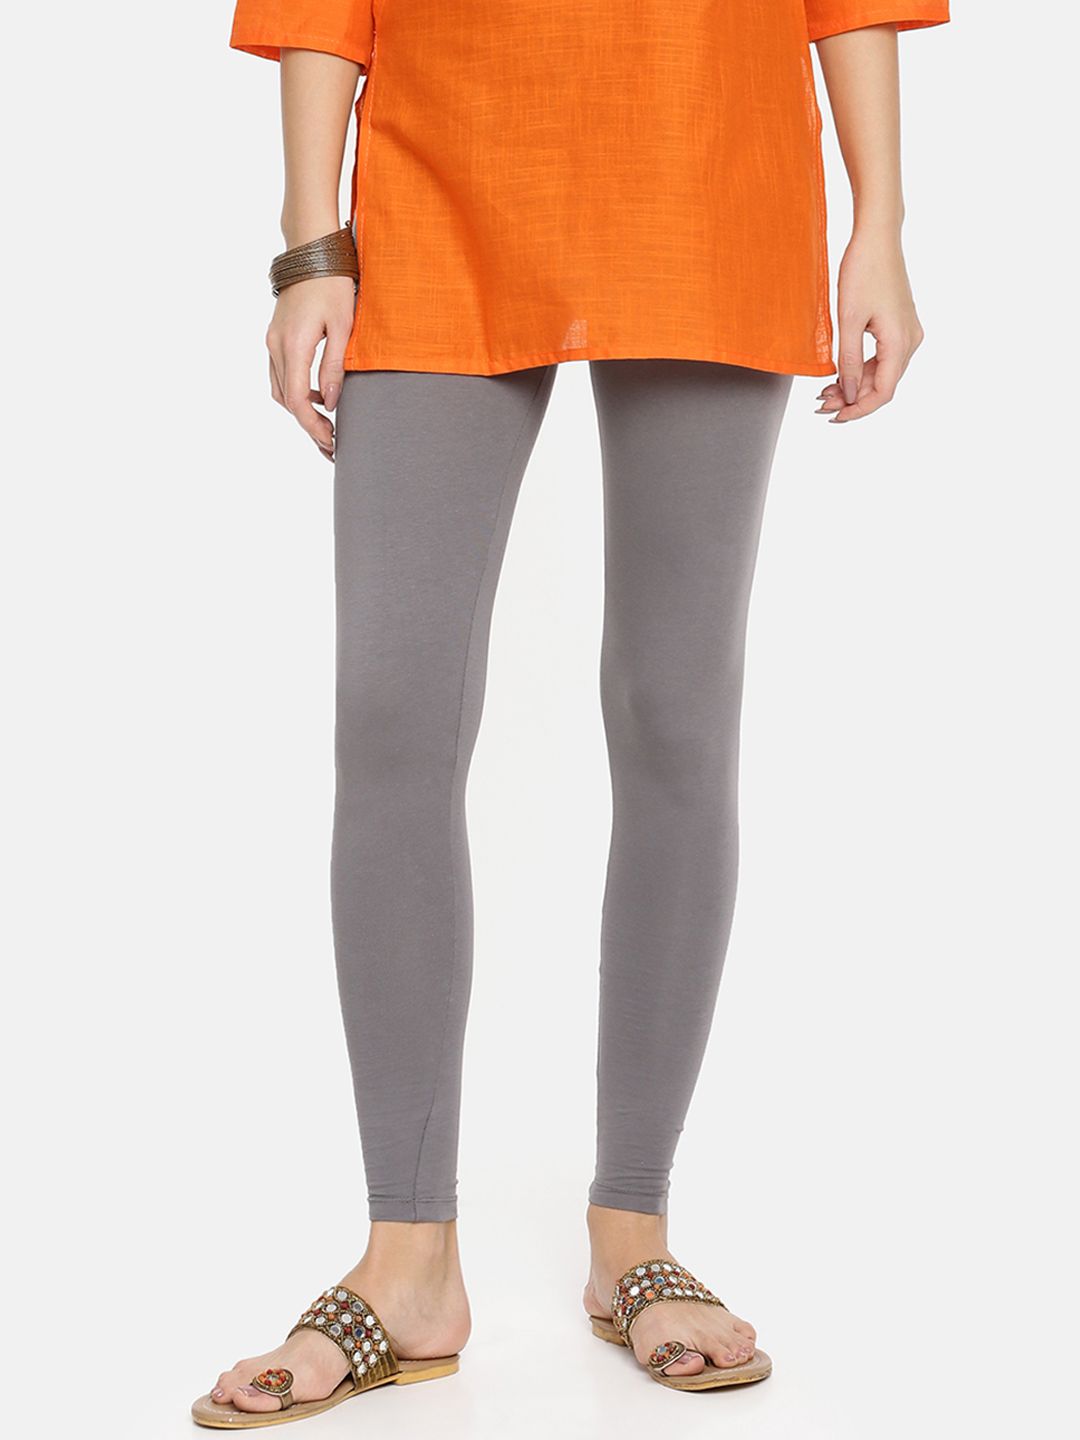 TWIN BIRDS Women Grey Solid Ankle-Length Leggings Price in India